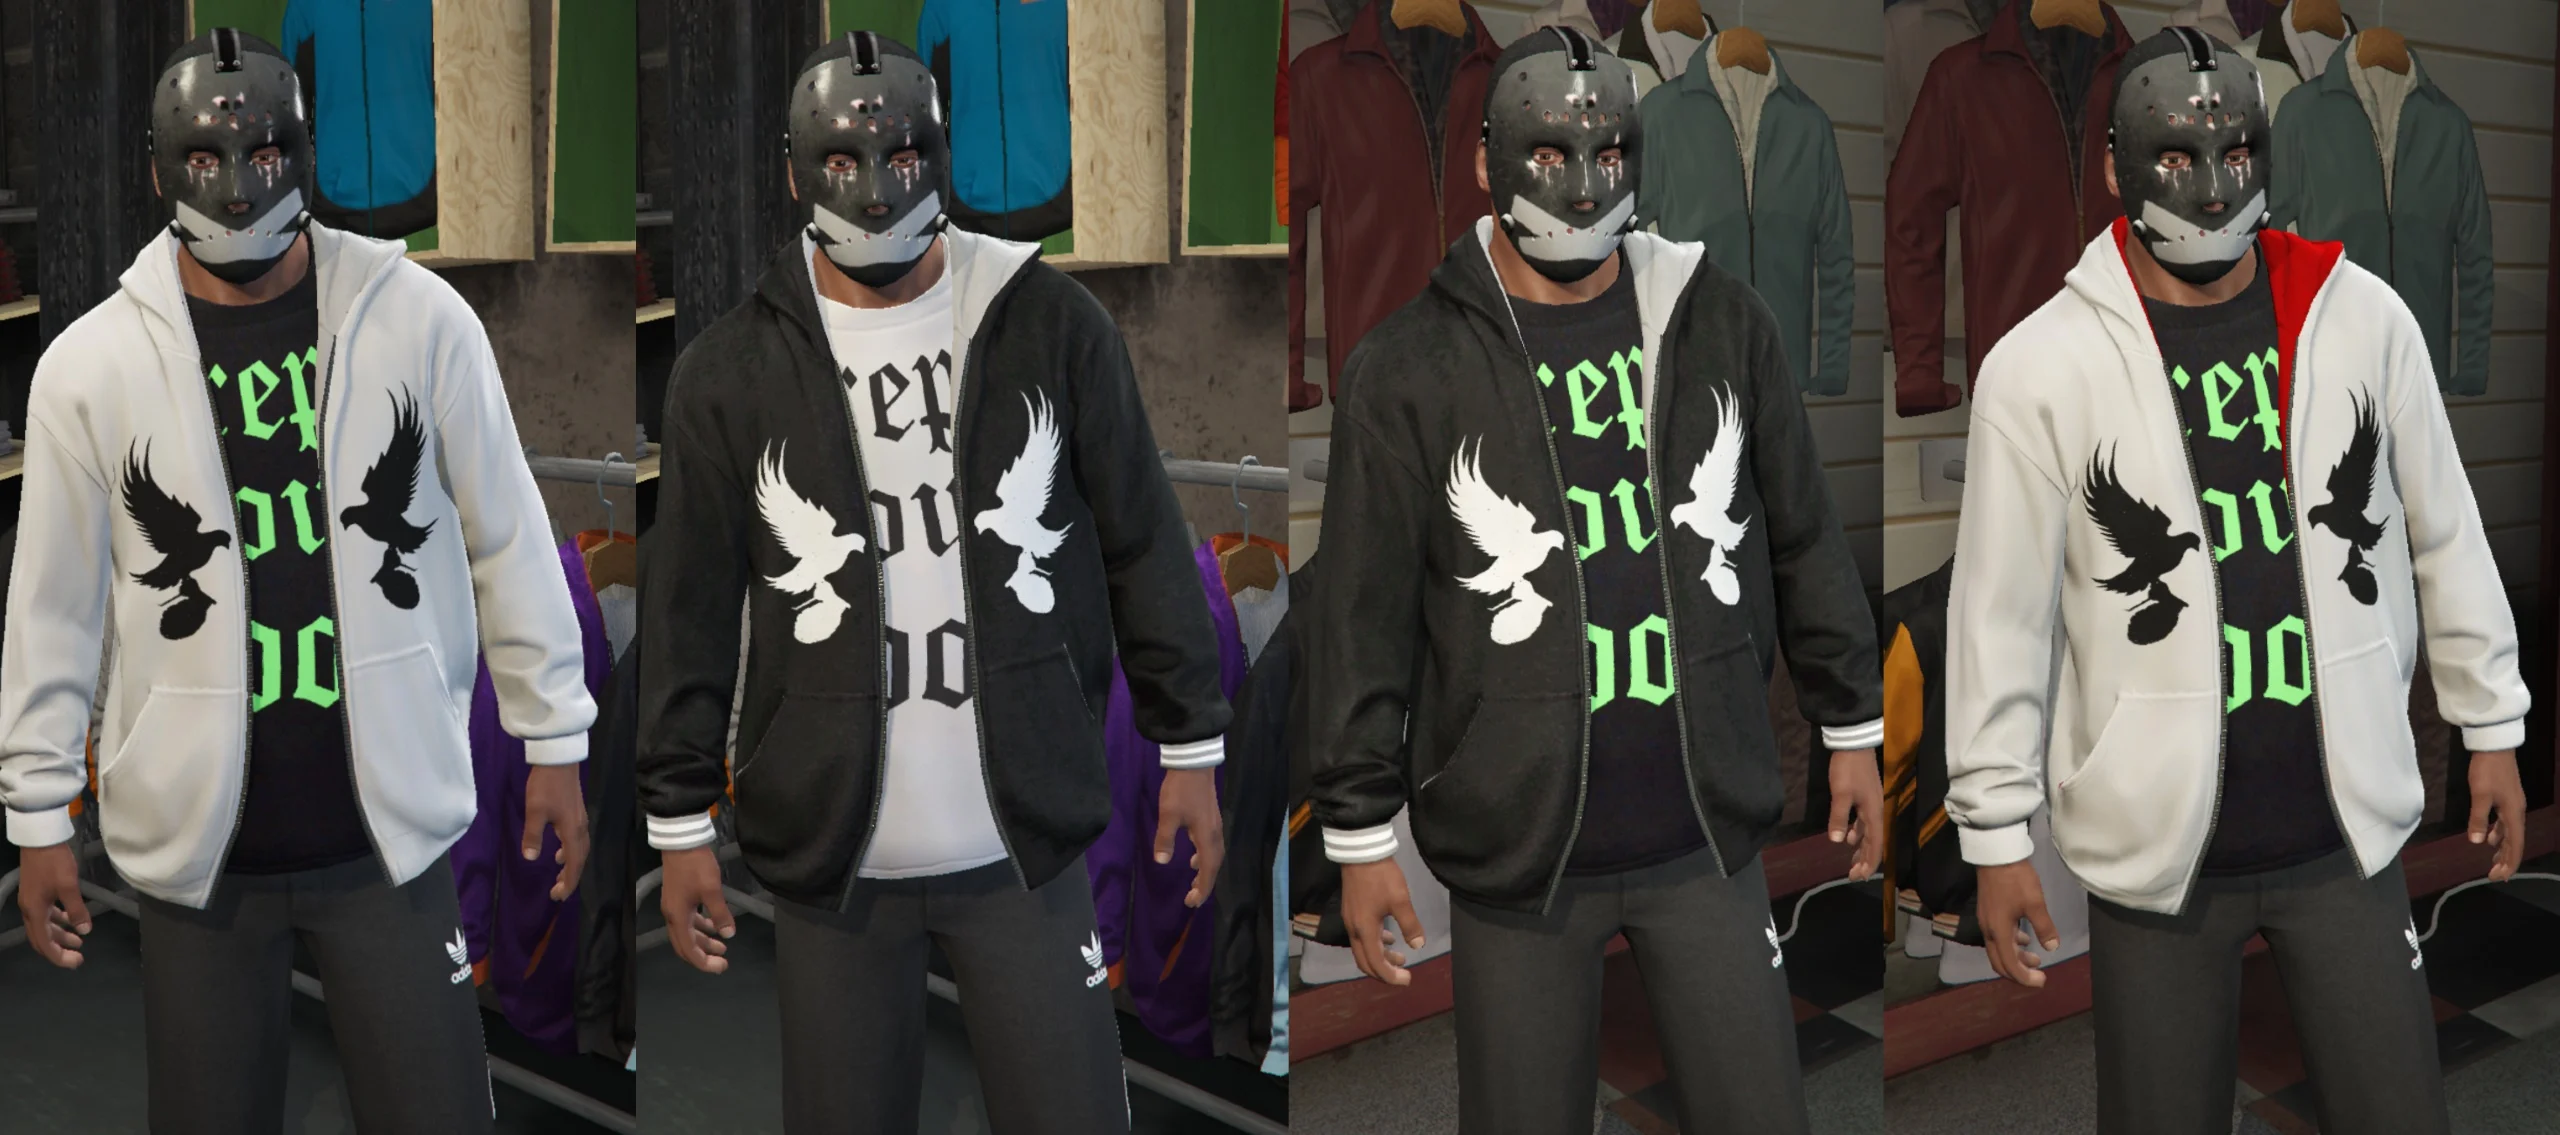 Gta 5 modded outfit фото 108